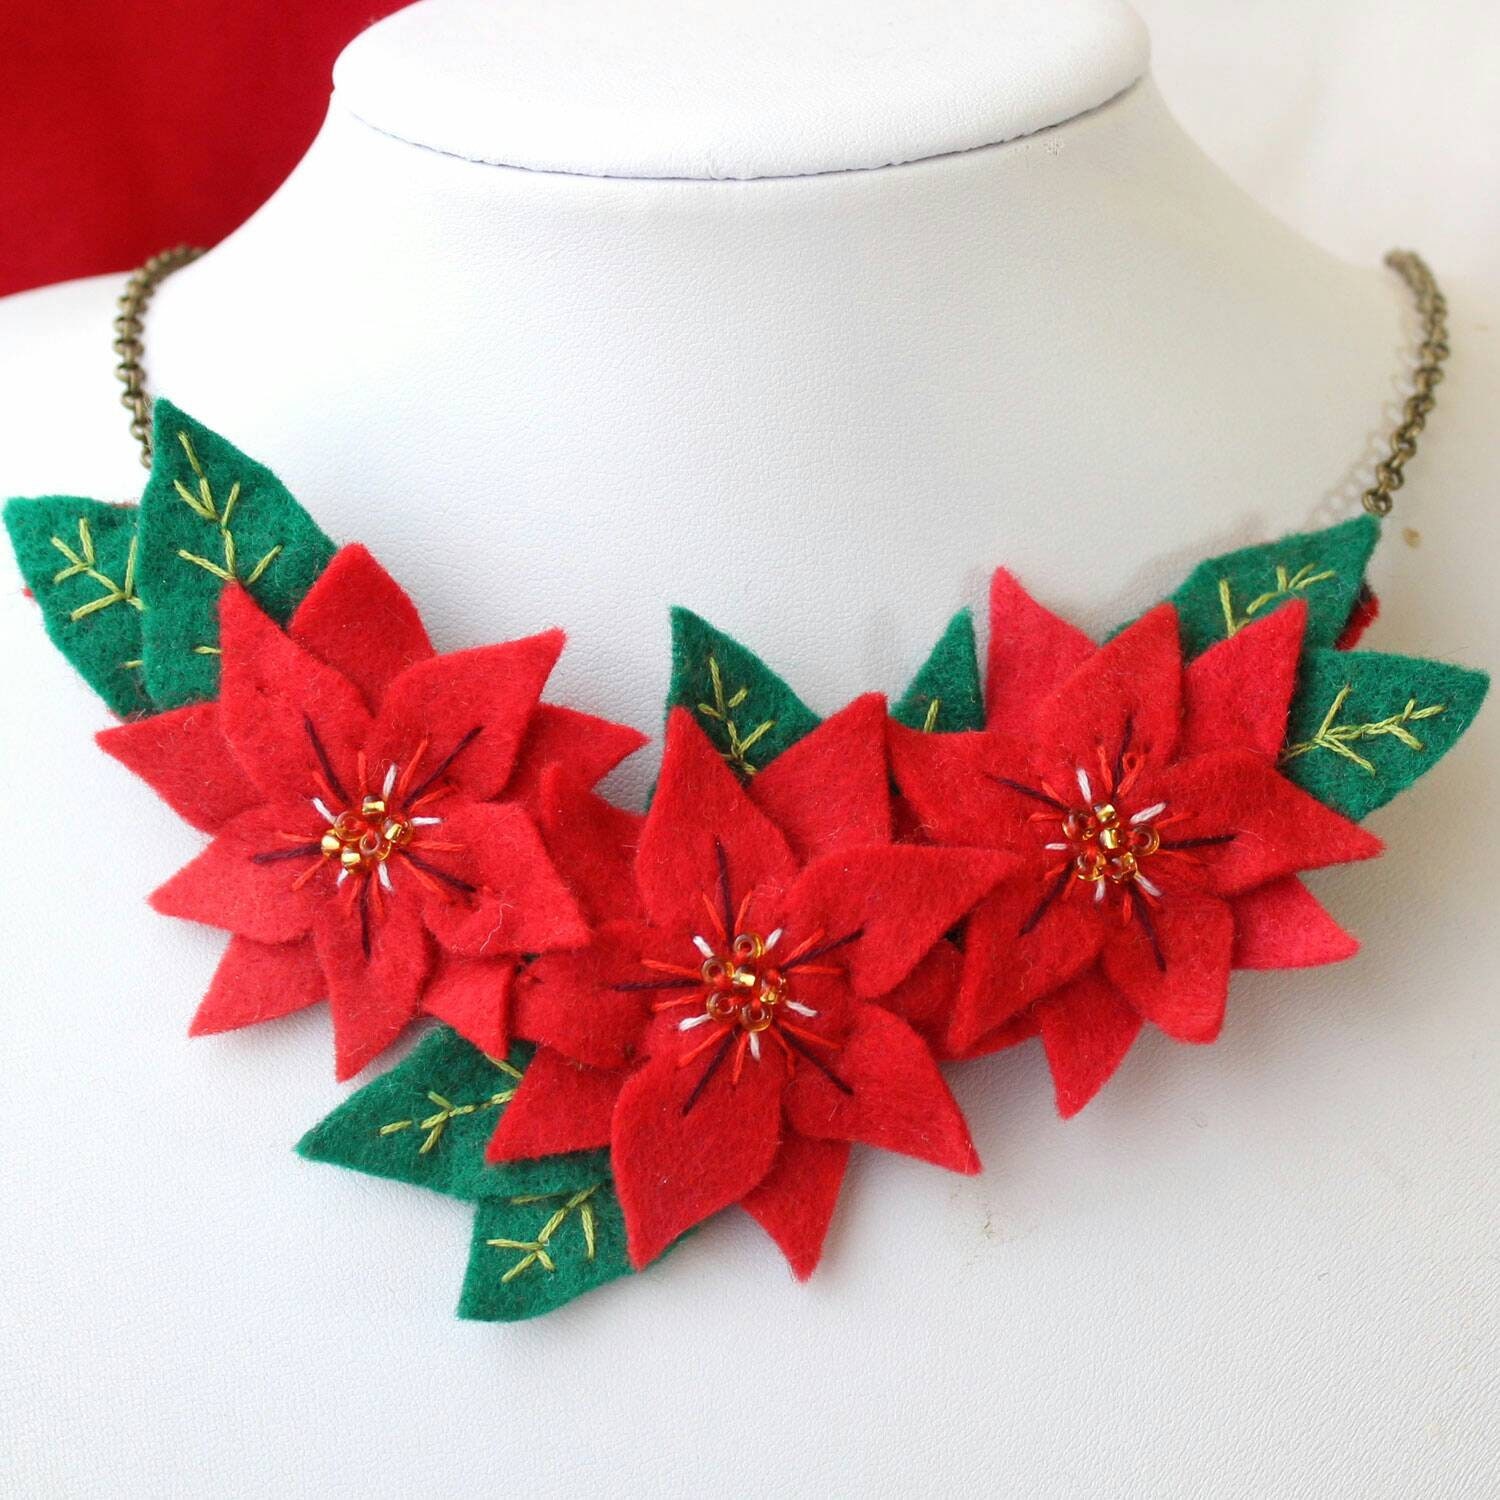 Red Poinsettia Christmas Necklace, Embroidered Felt Flower Red, Gold & Green Statement Seasonal Delights Holiday Jewelry For Her